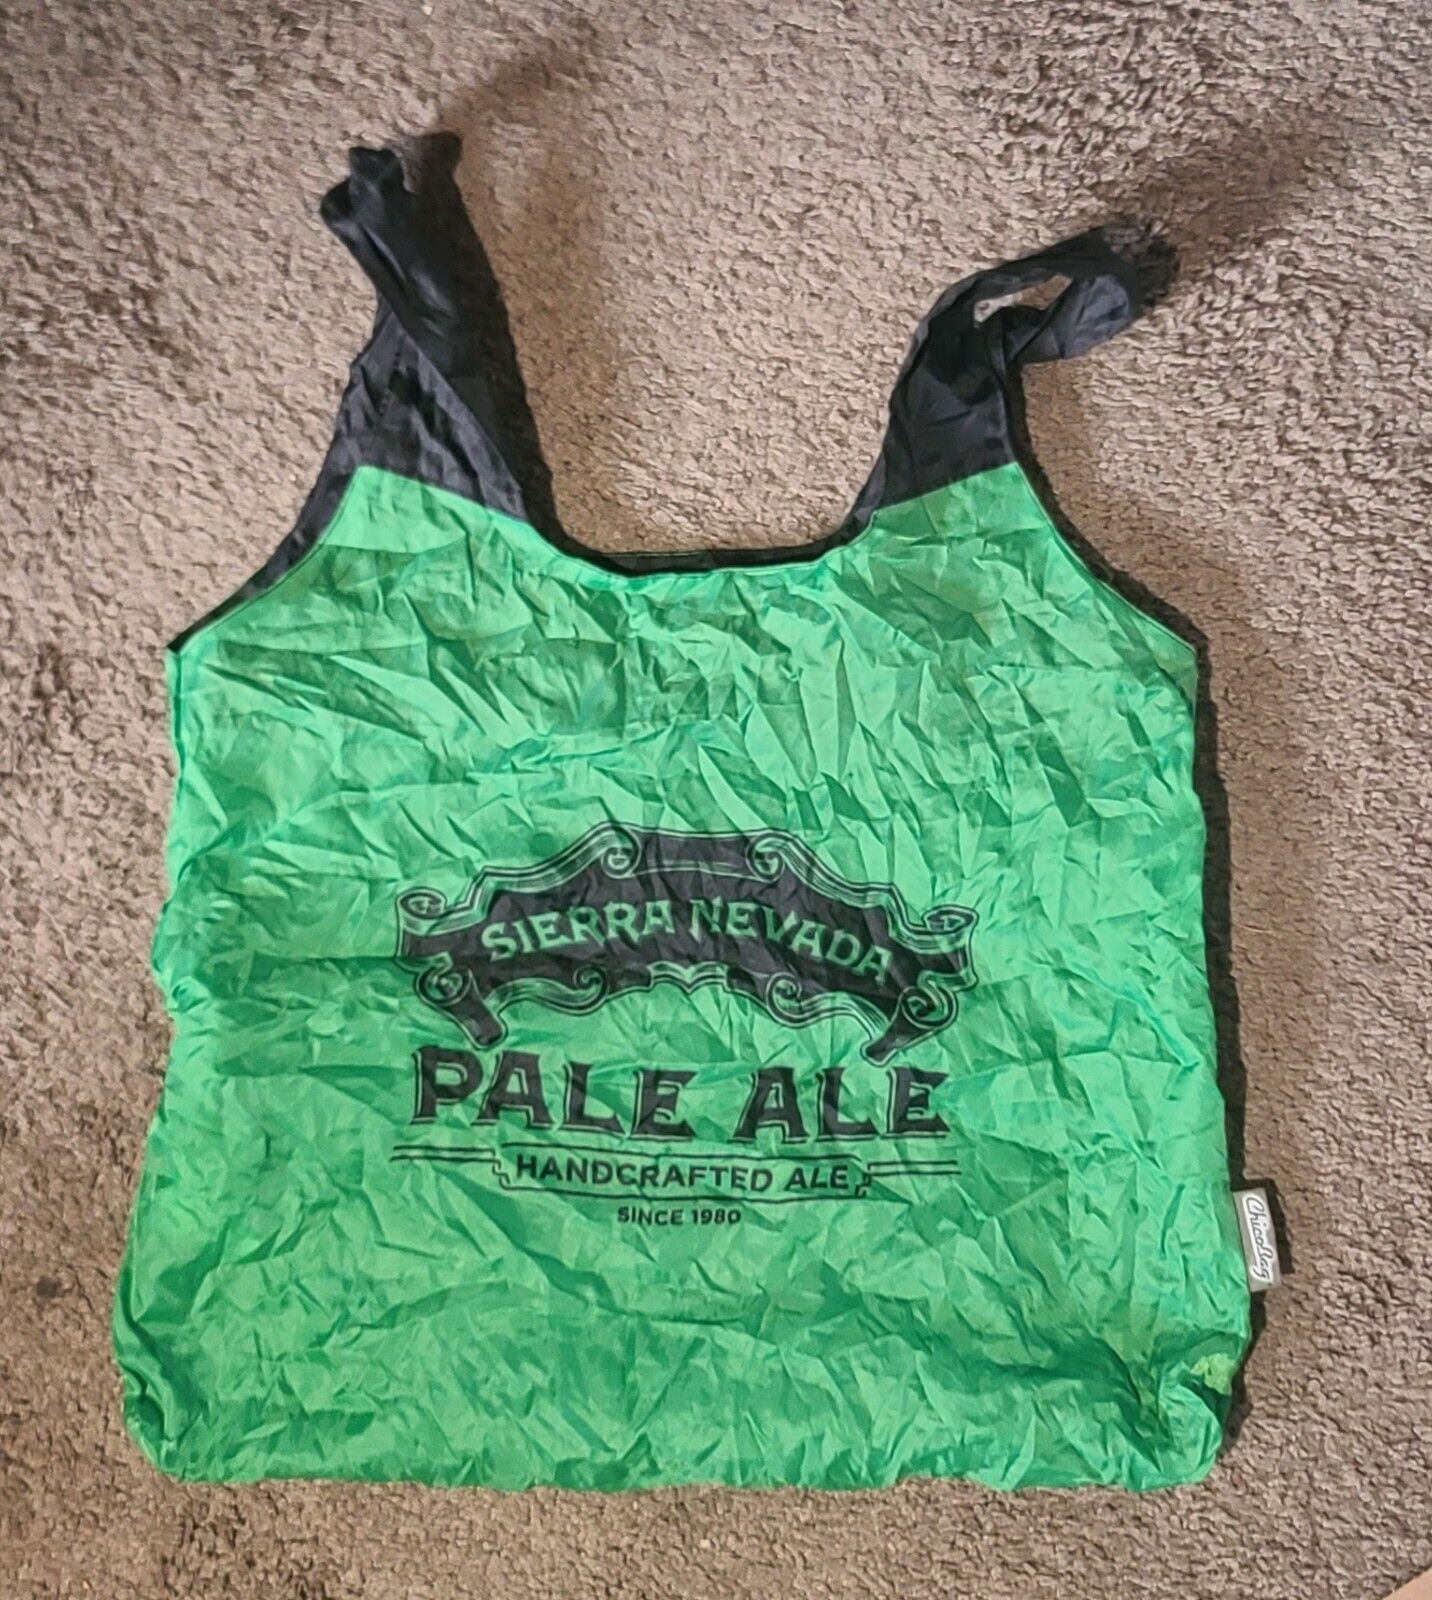 Sierra Nevada Pale Ale Chico Bag Reusable Shopping Compact Tote with Carabineer Без бренда - фотография #3